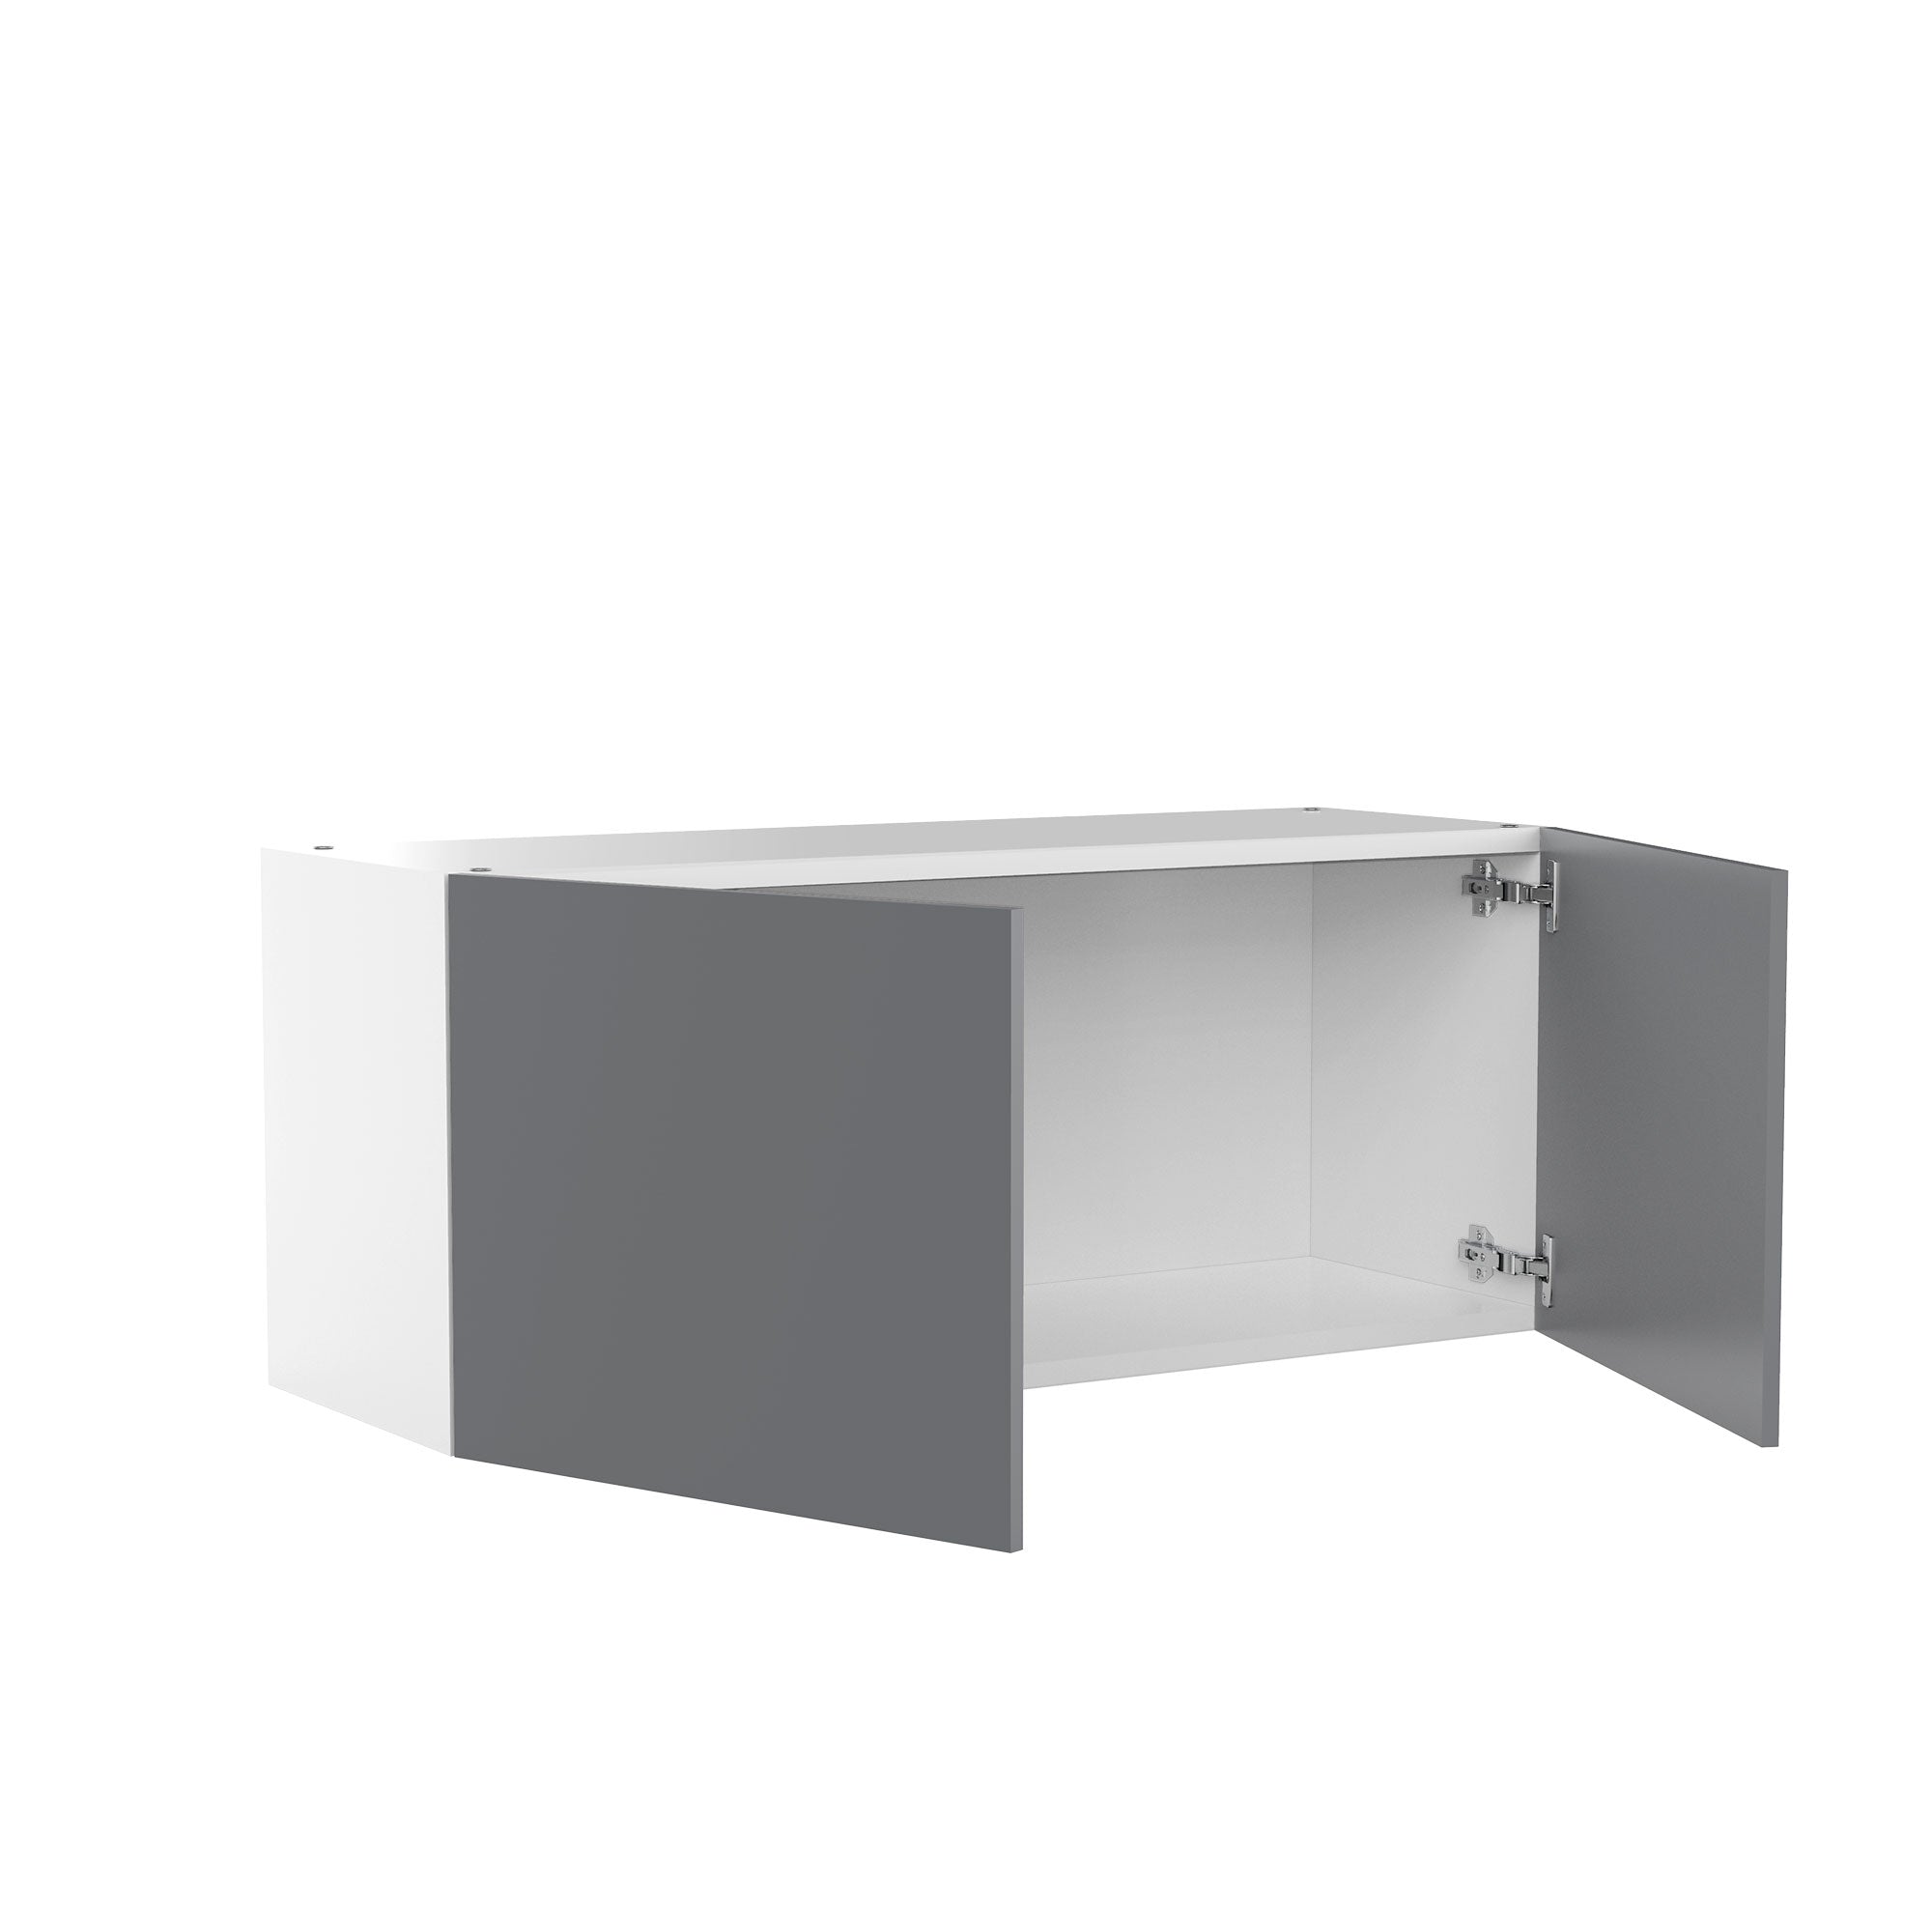 RTA - Glossy Grey - Double Door Wall Cabinets | 33"W x 15"H x 12"D